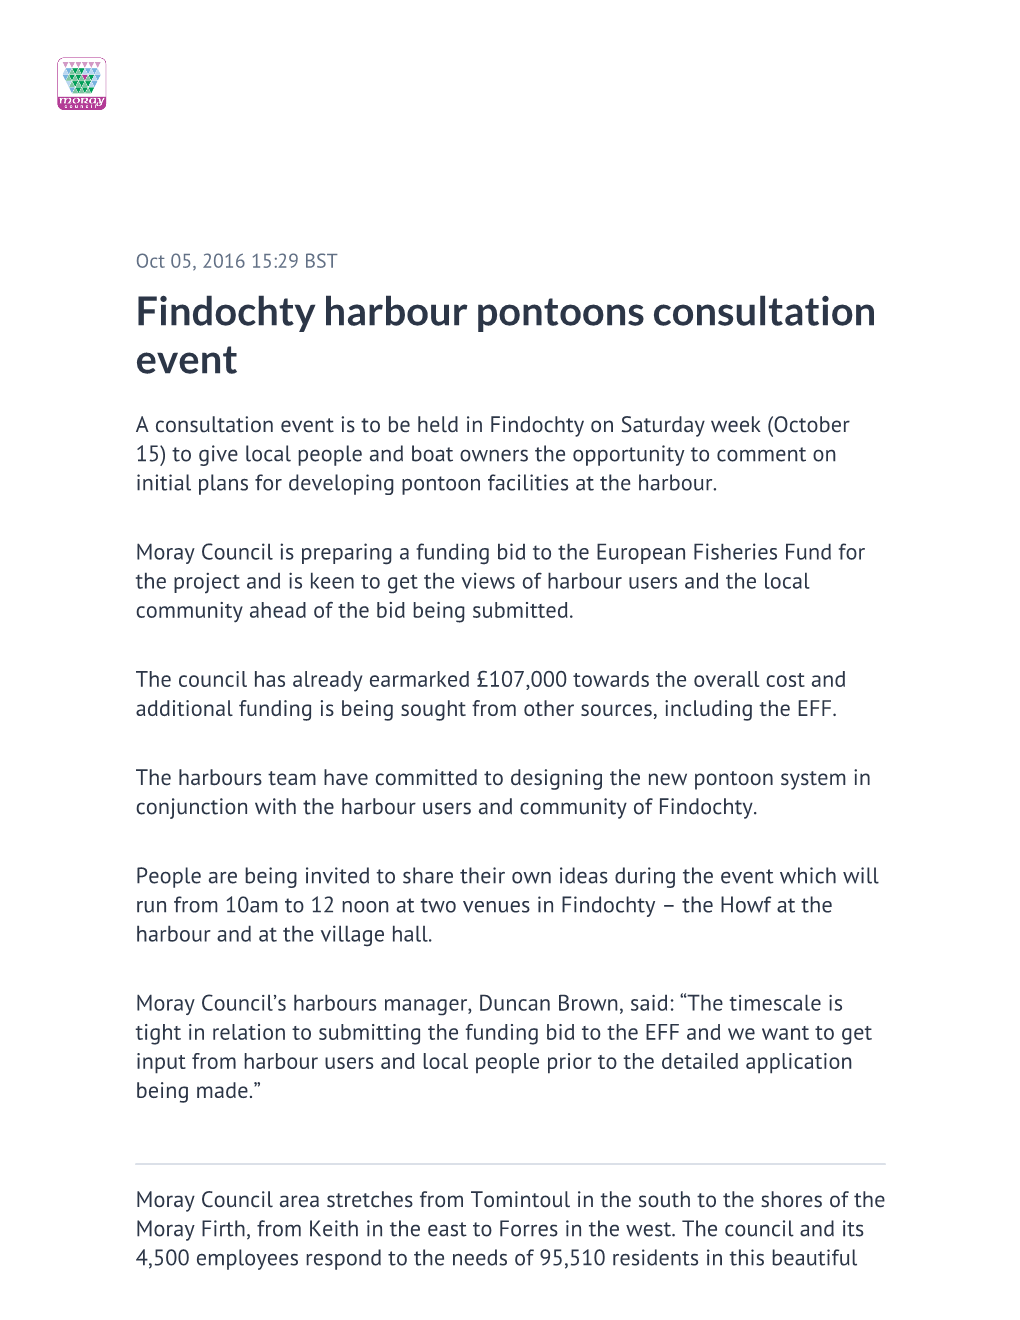 Findochty Harbour Pontoons Consultation Event